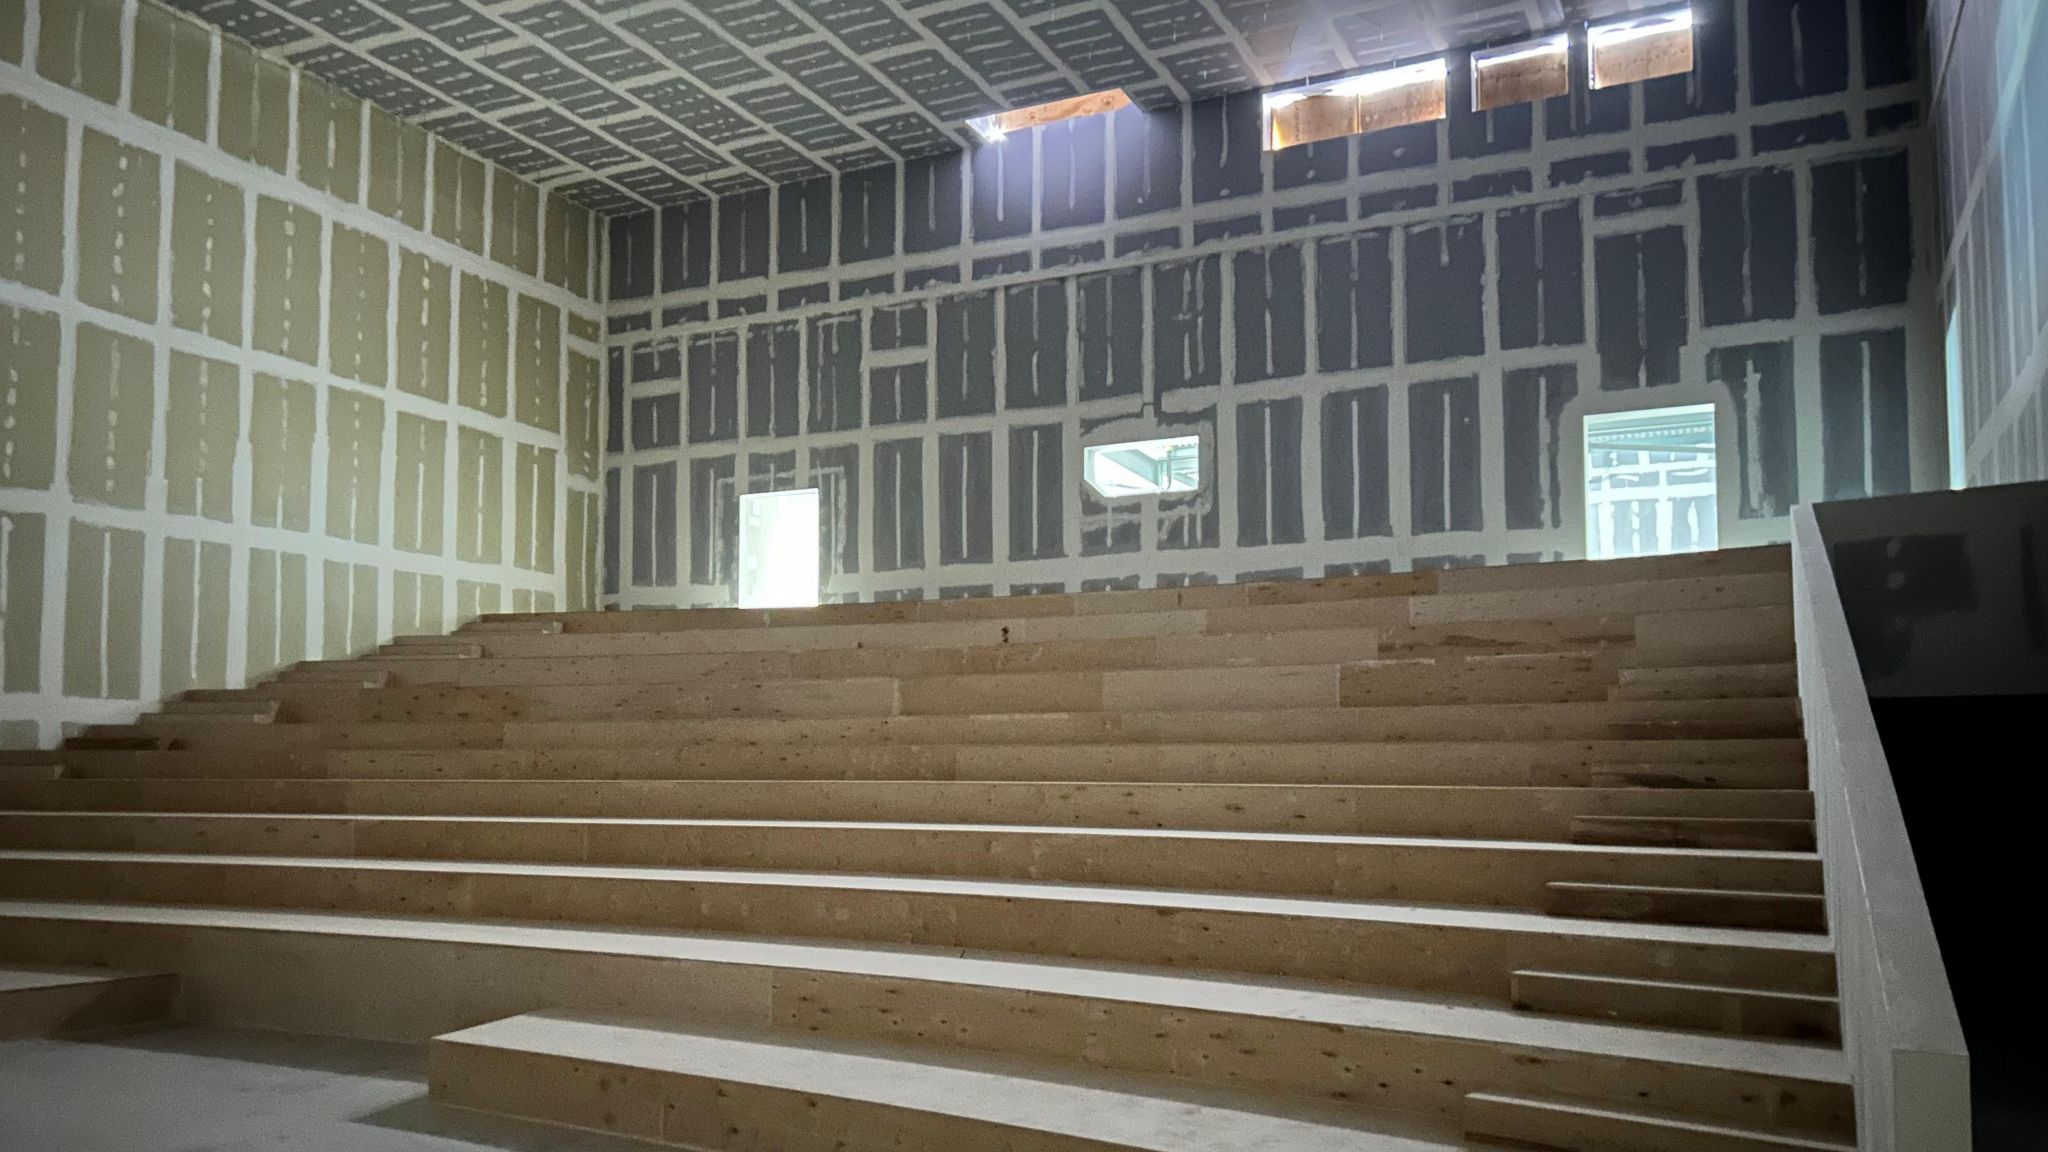 Cinema construction site with wooden seating frames 